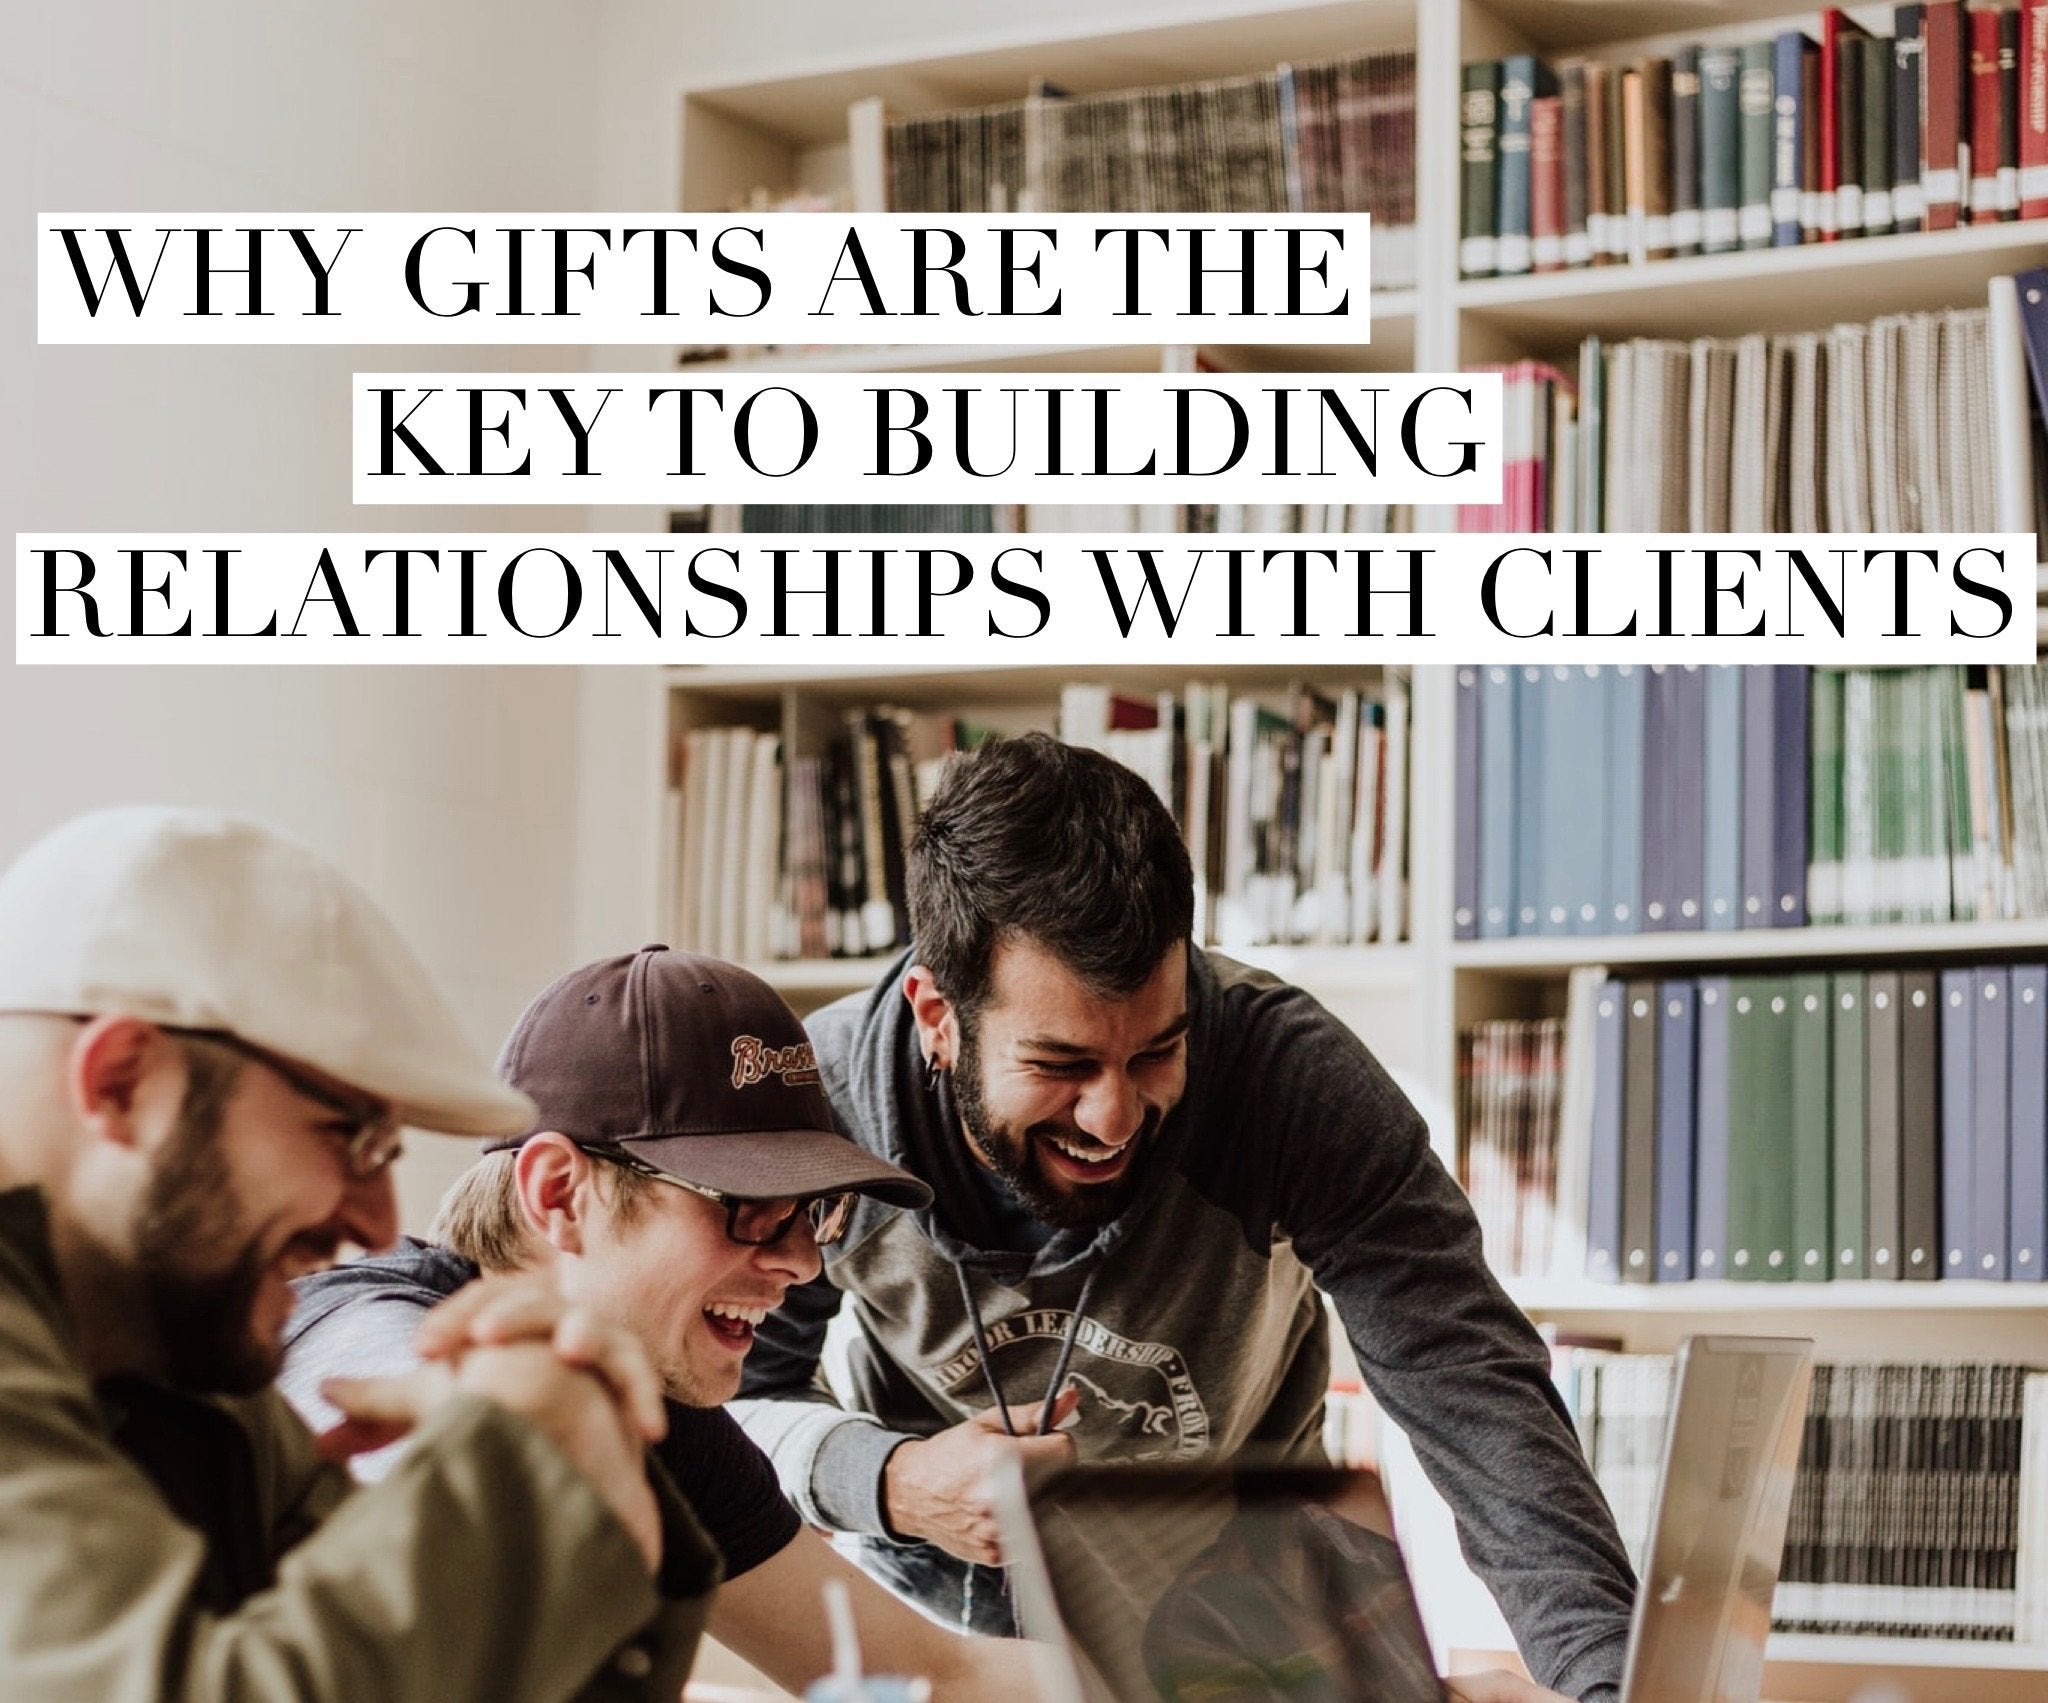 Why gifts are the key to building relationships with clients | Social Stories Club